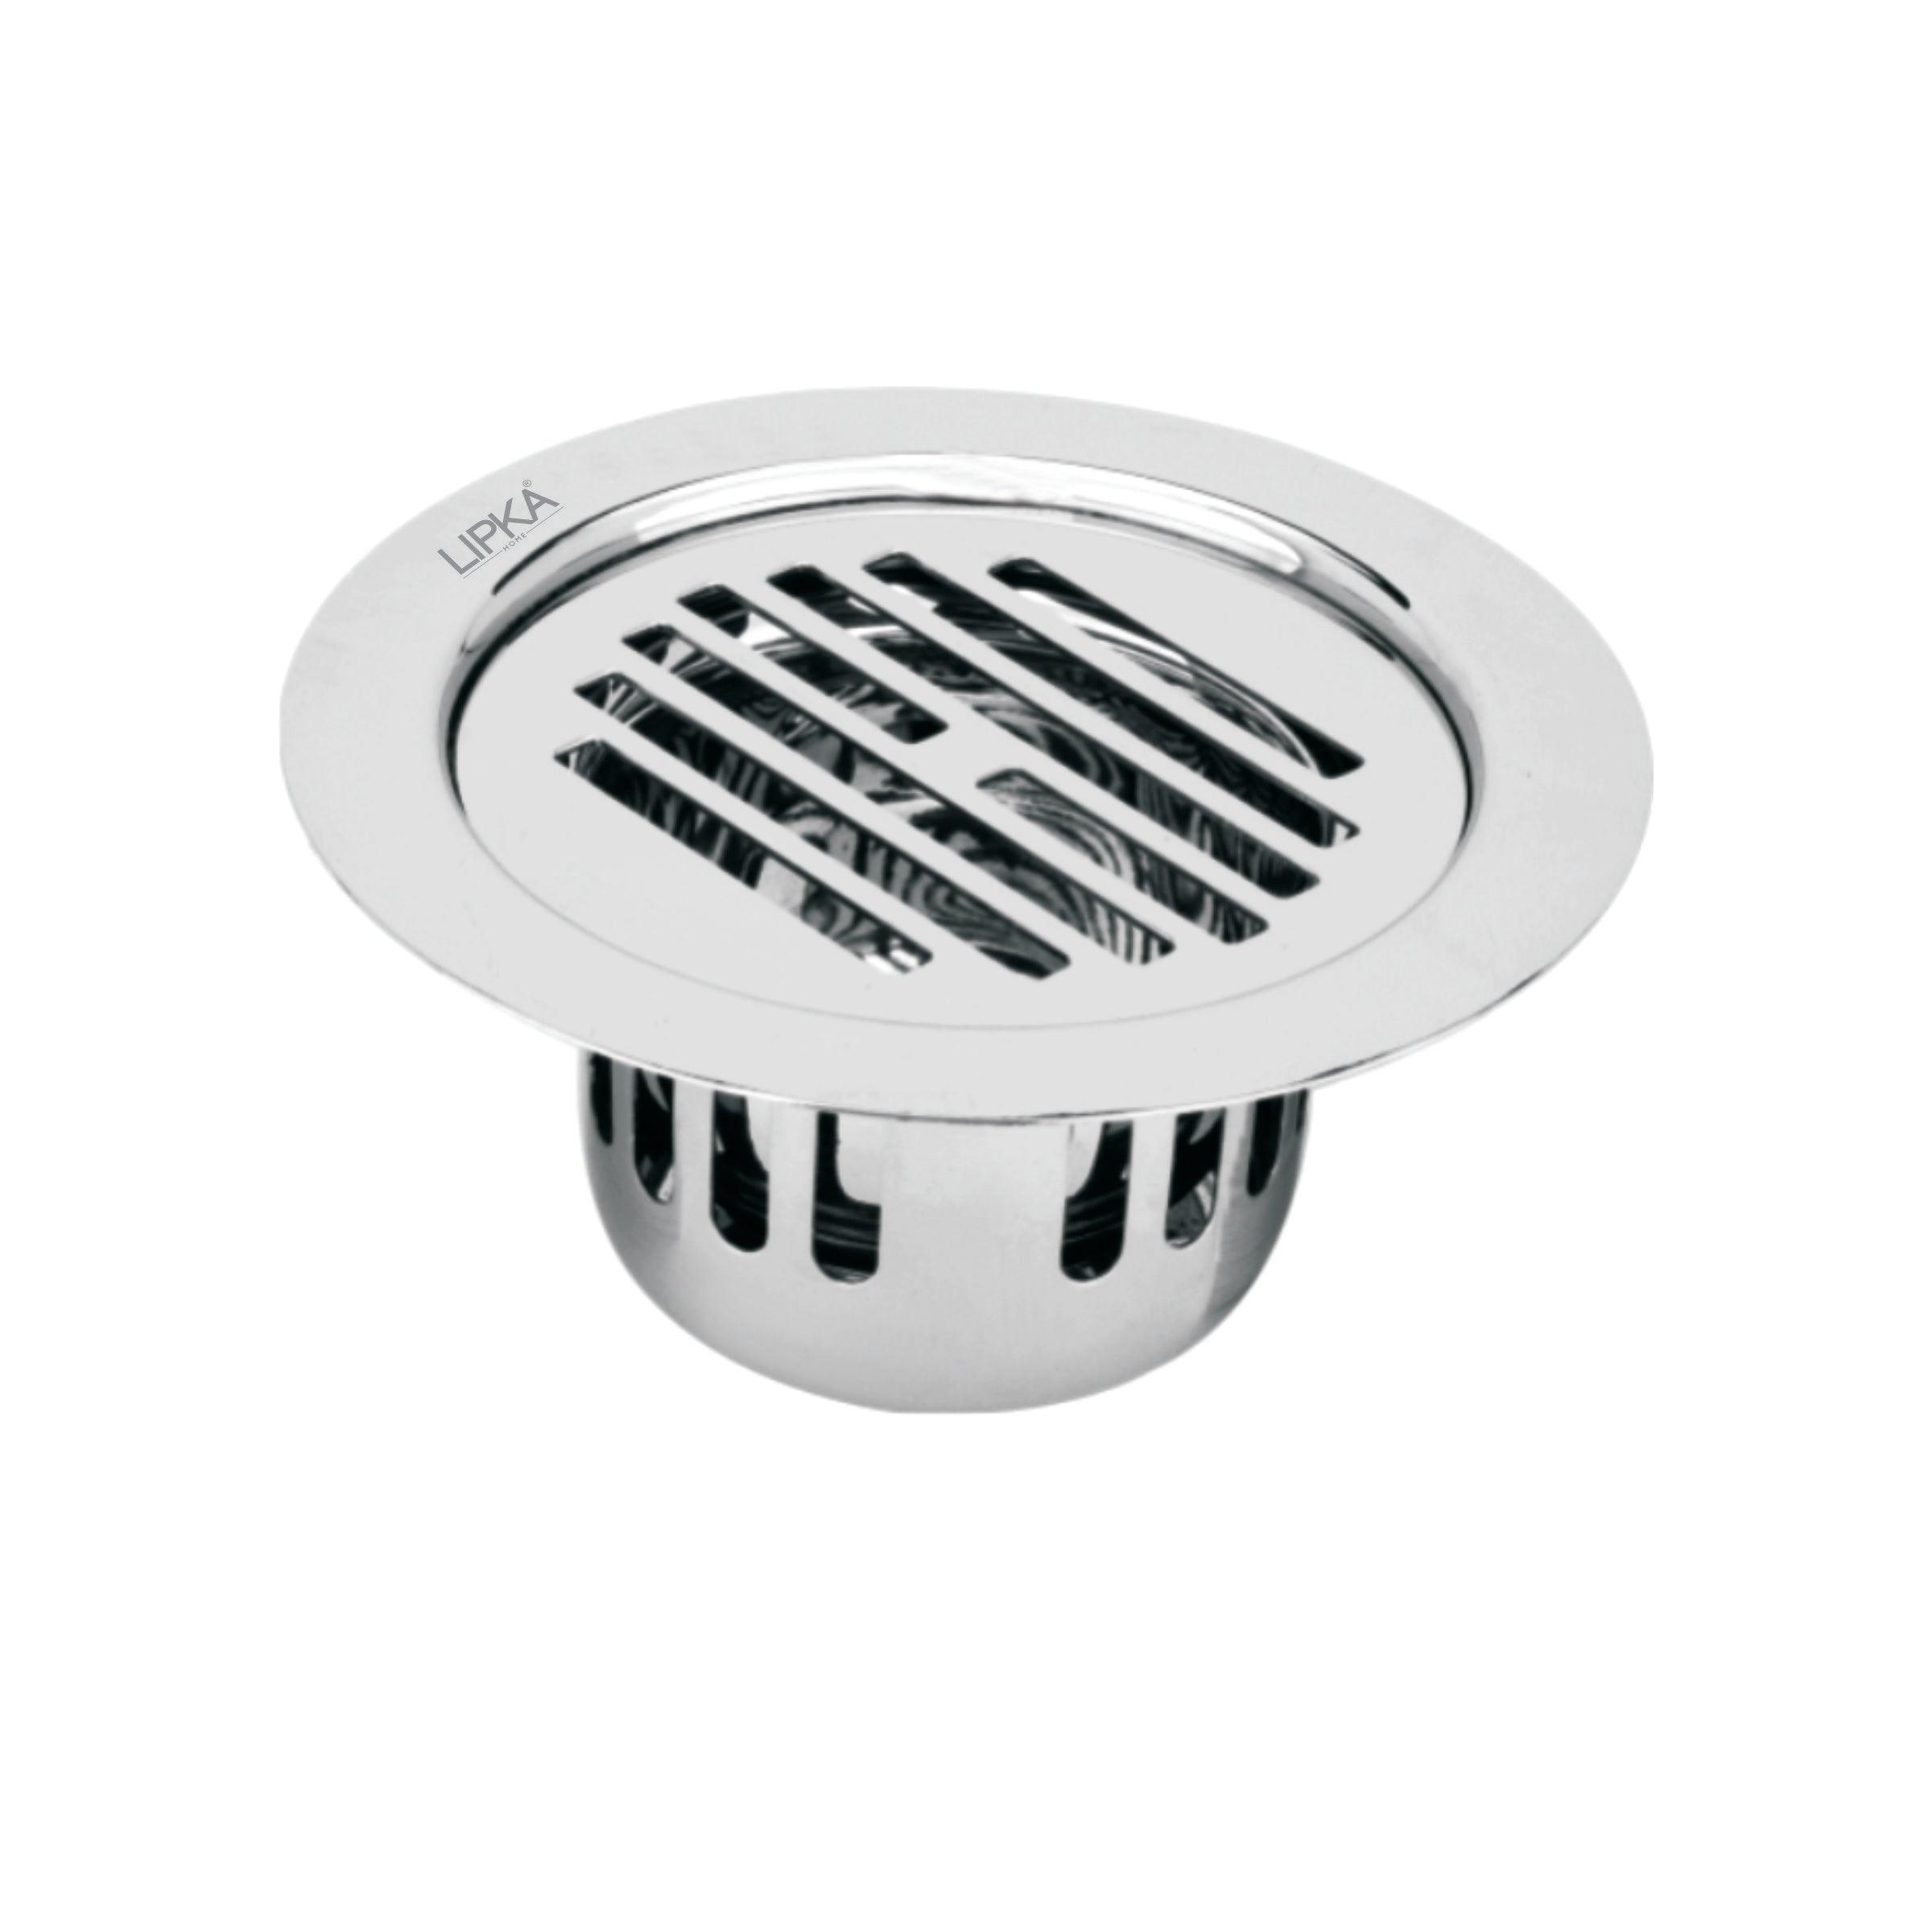 Golden Classic Jali Round Flat Cut Floor Drain (5.5 inches) with Cockroach Trap 